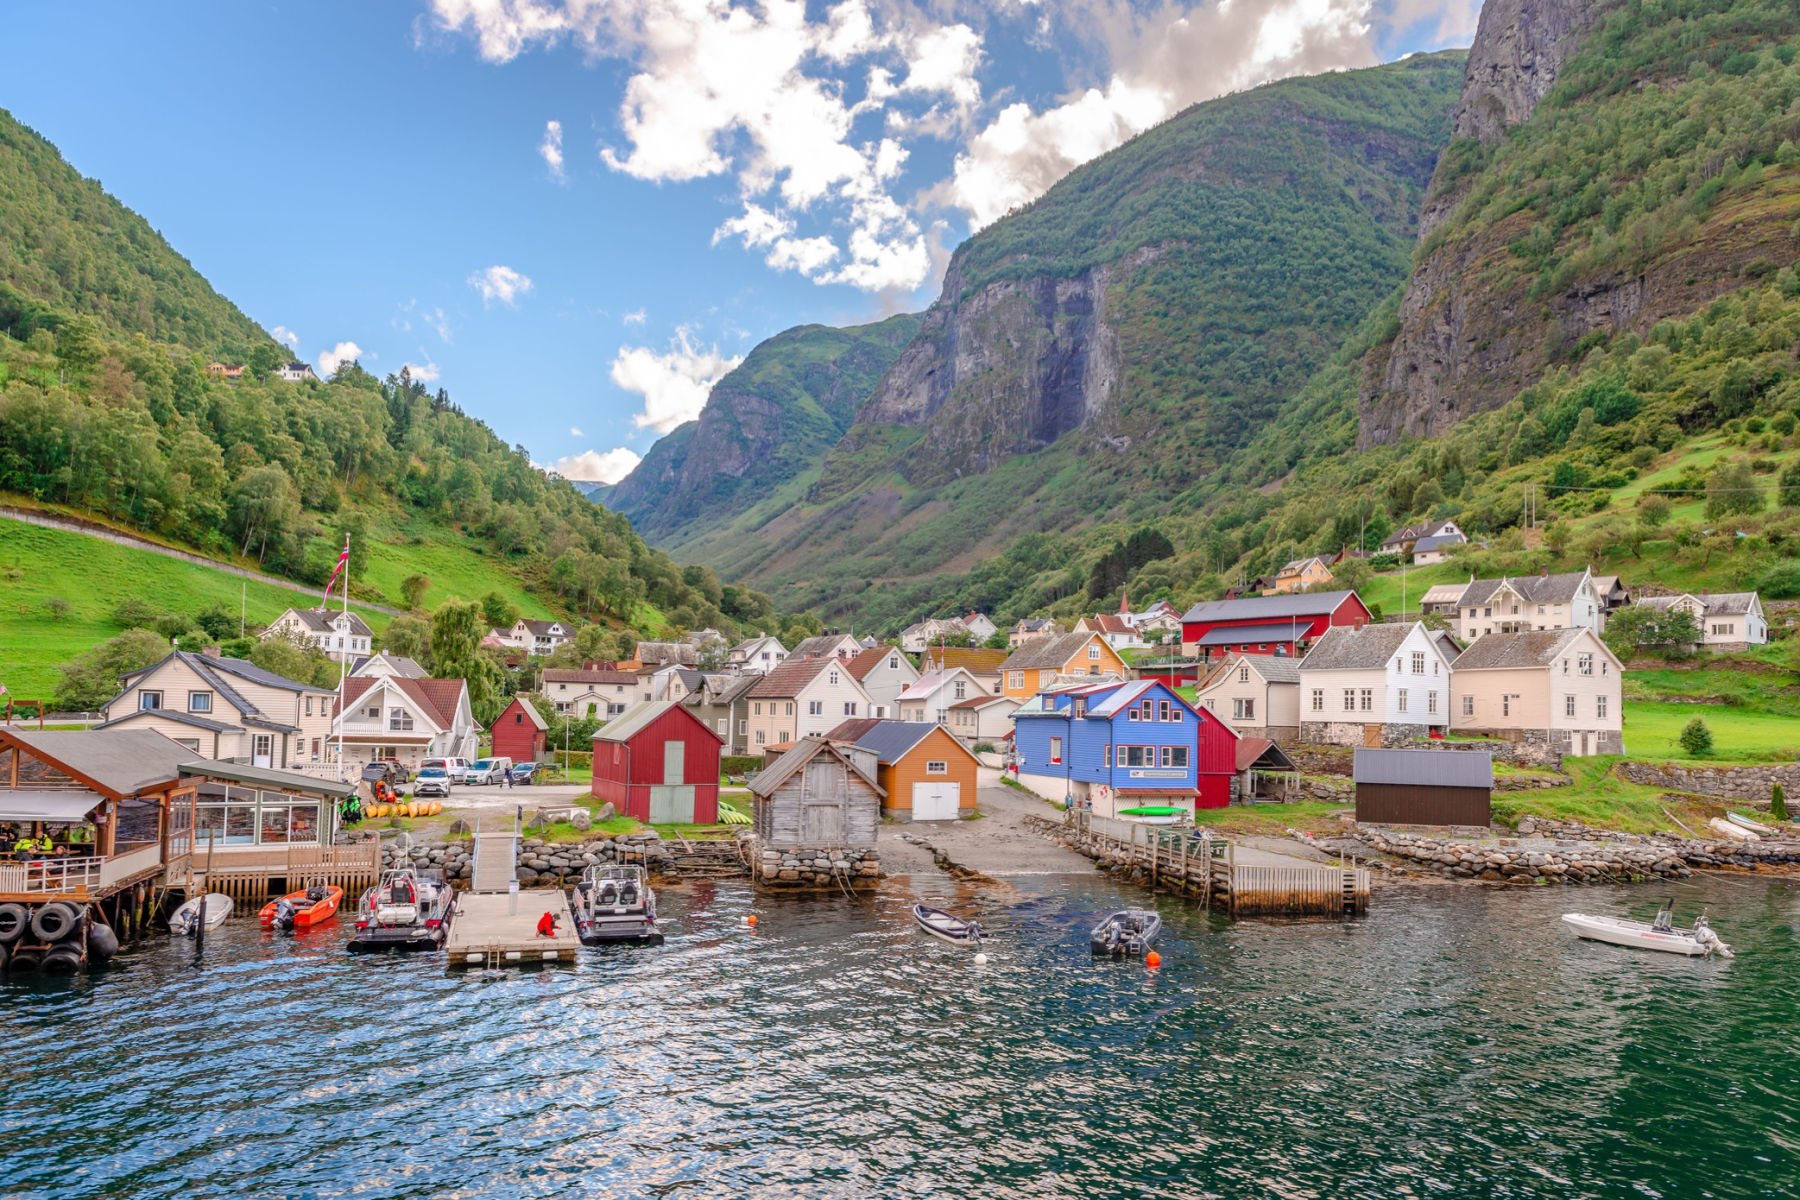 A view of Undredal village from the fjord. Photo: Apostolis Giontzis / Shutterstock.com.